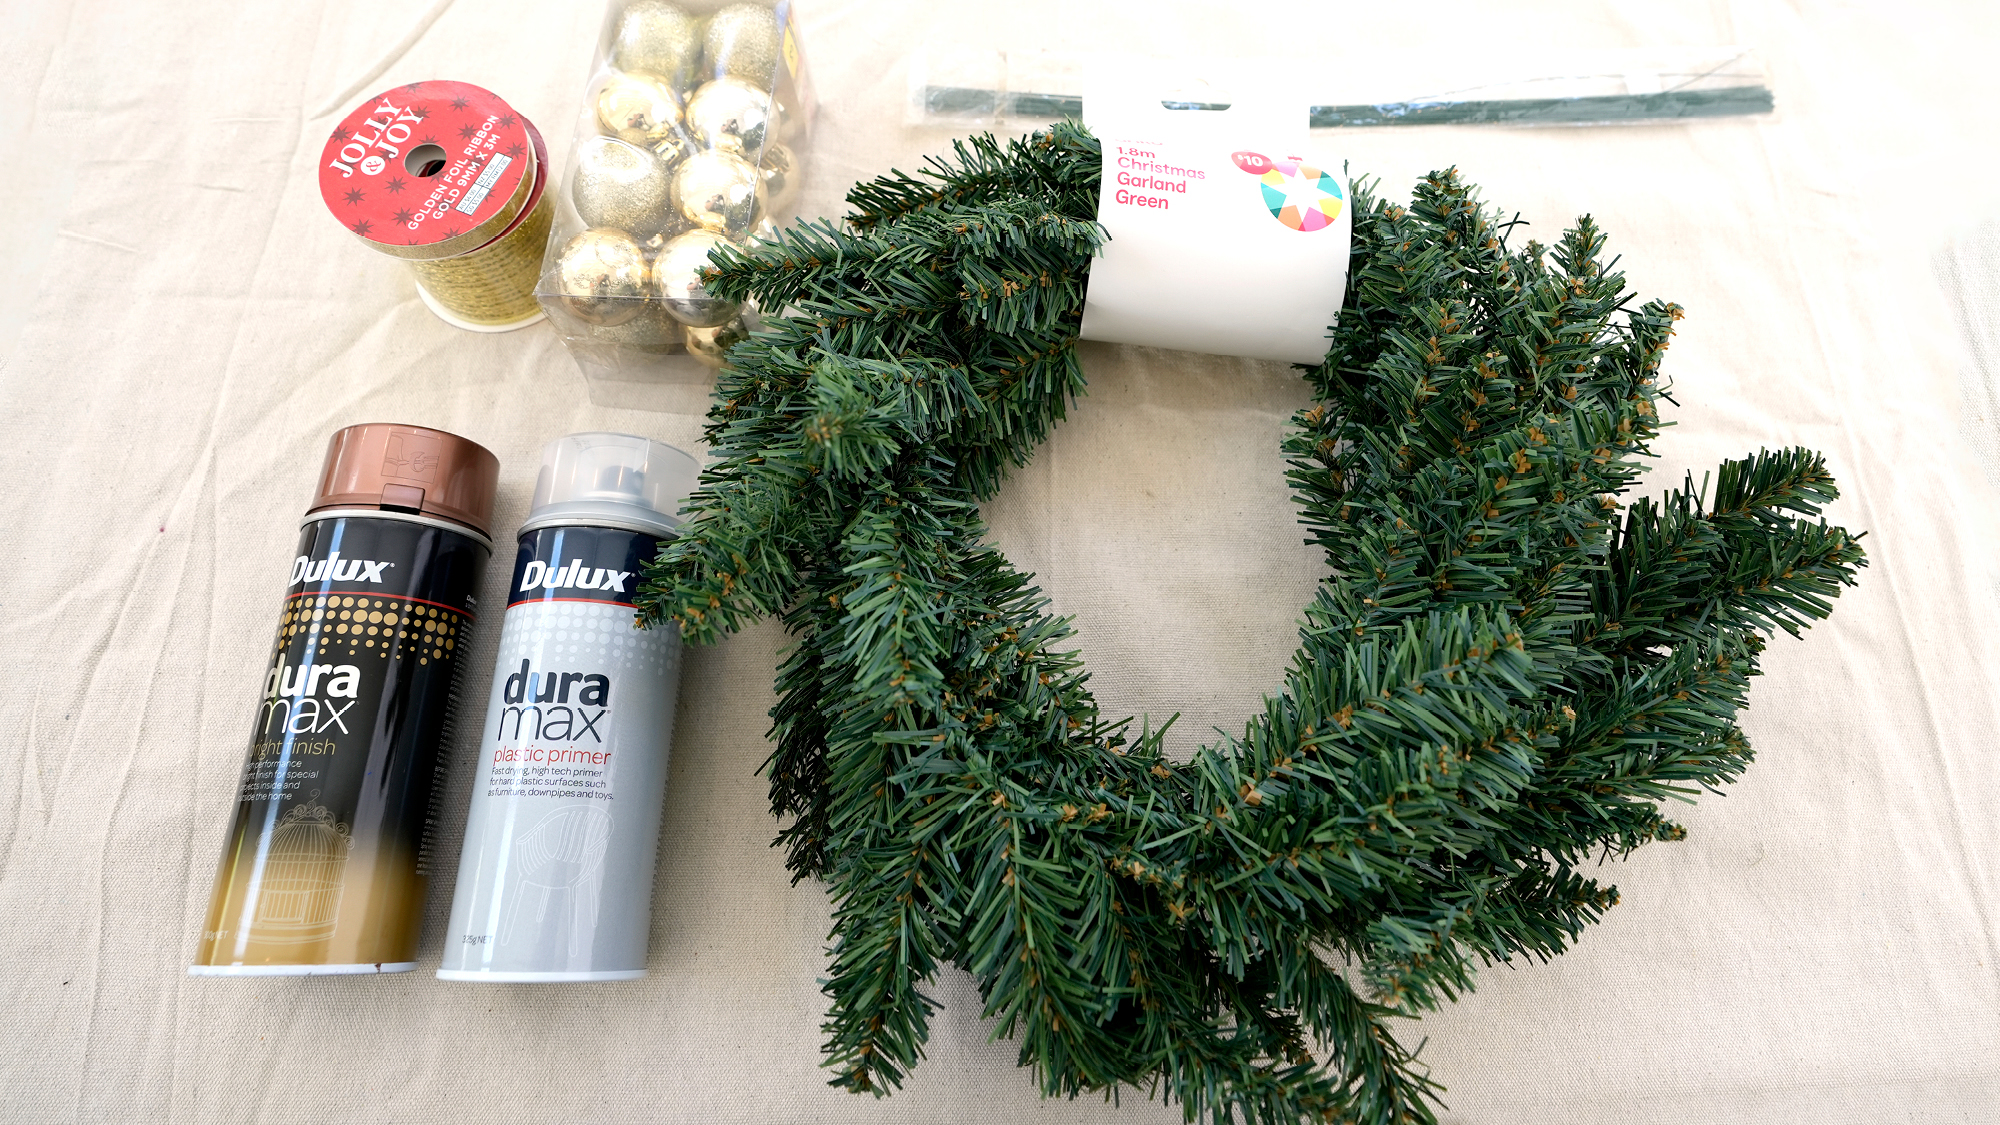 Budget to Boujee Christmas Wreath in 3 Easy Steps